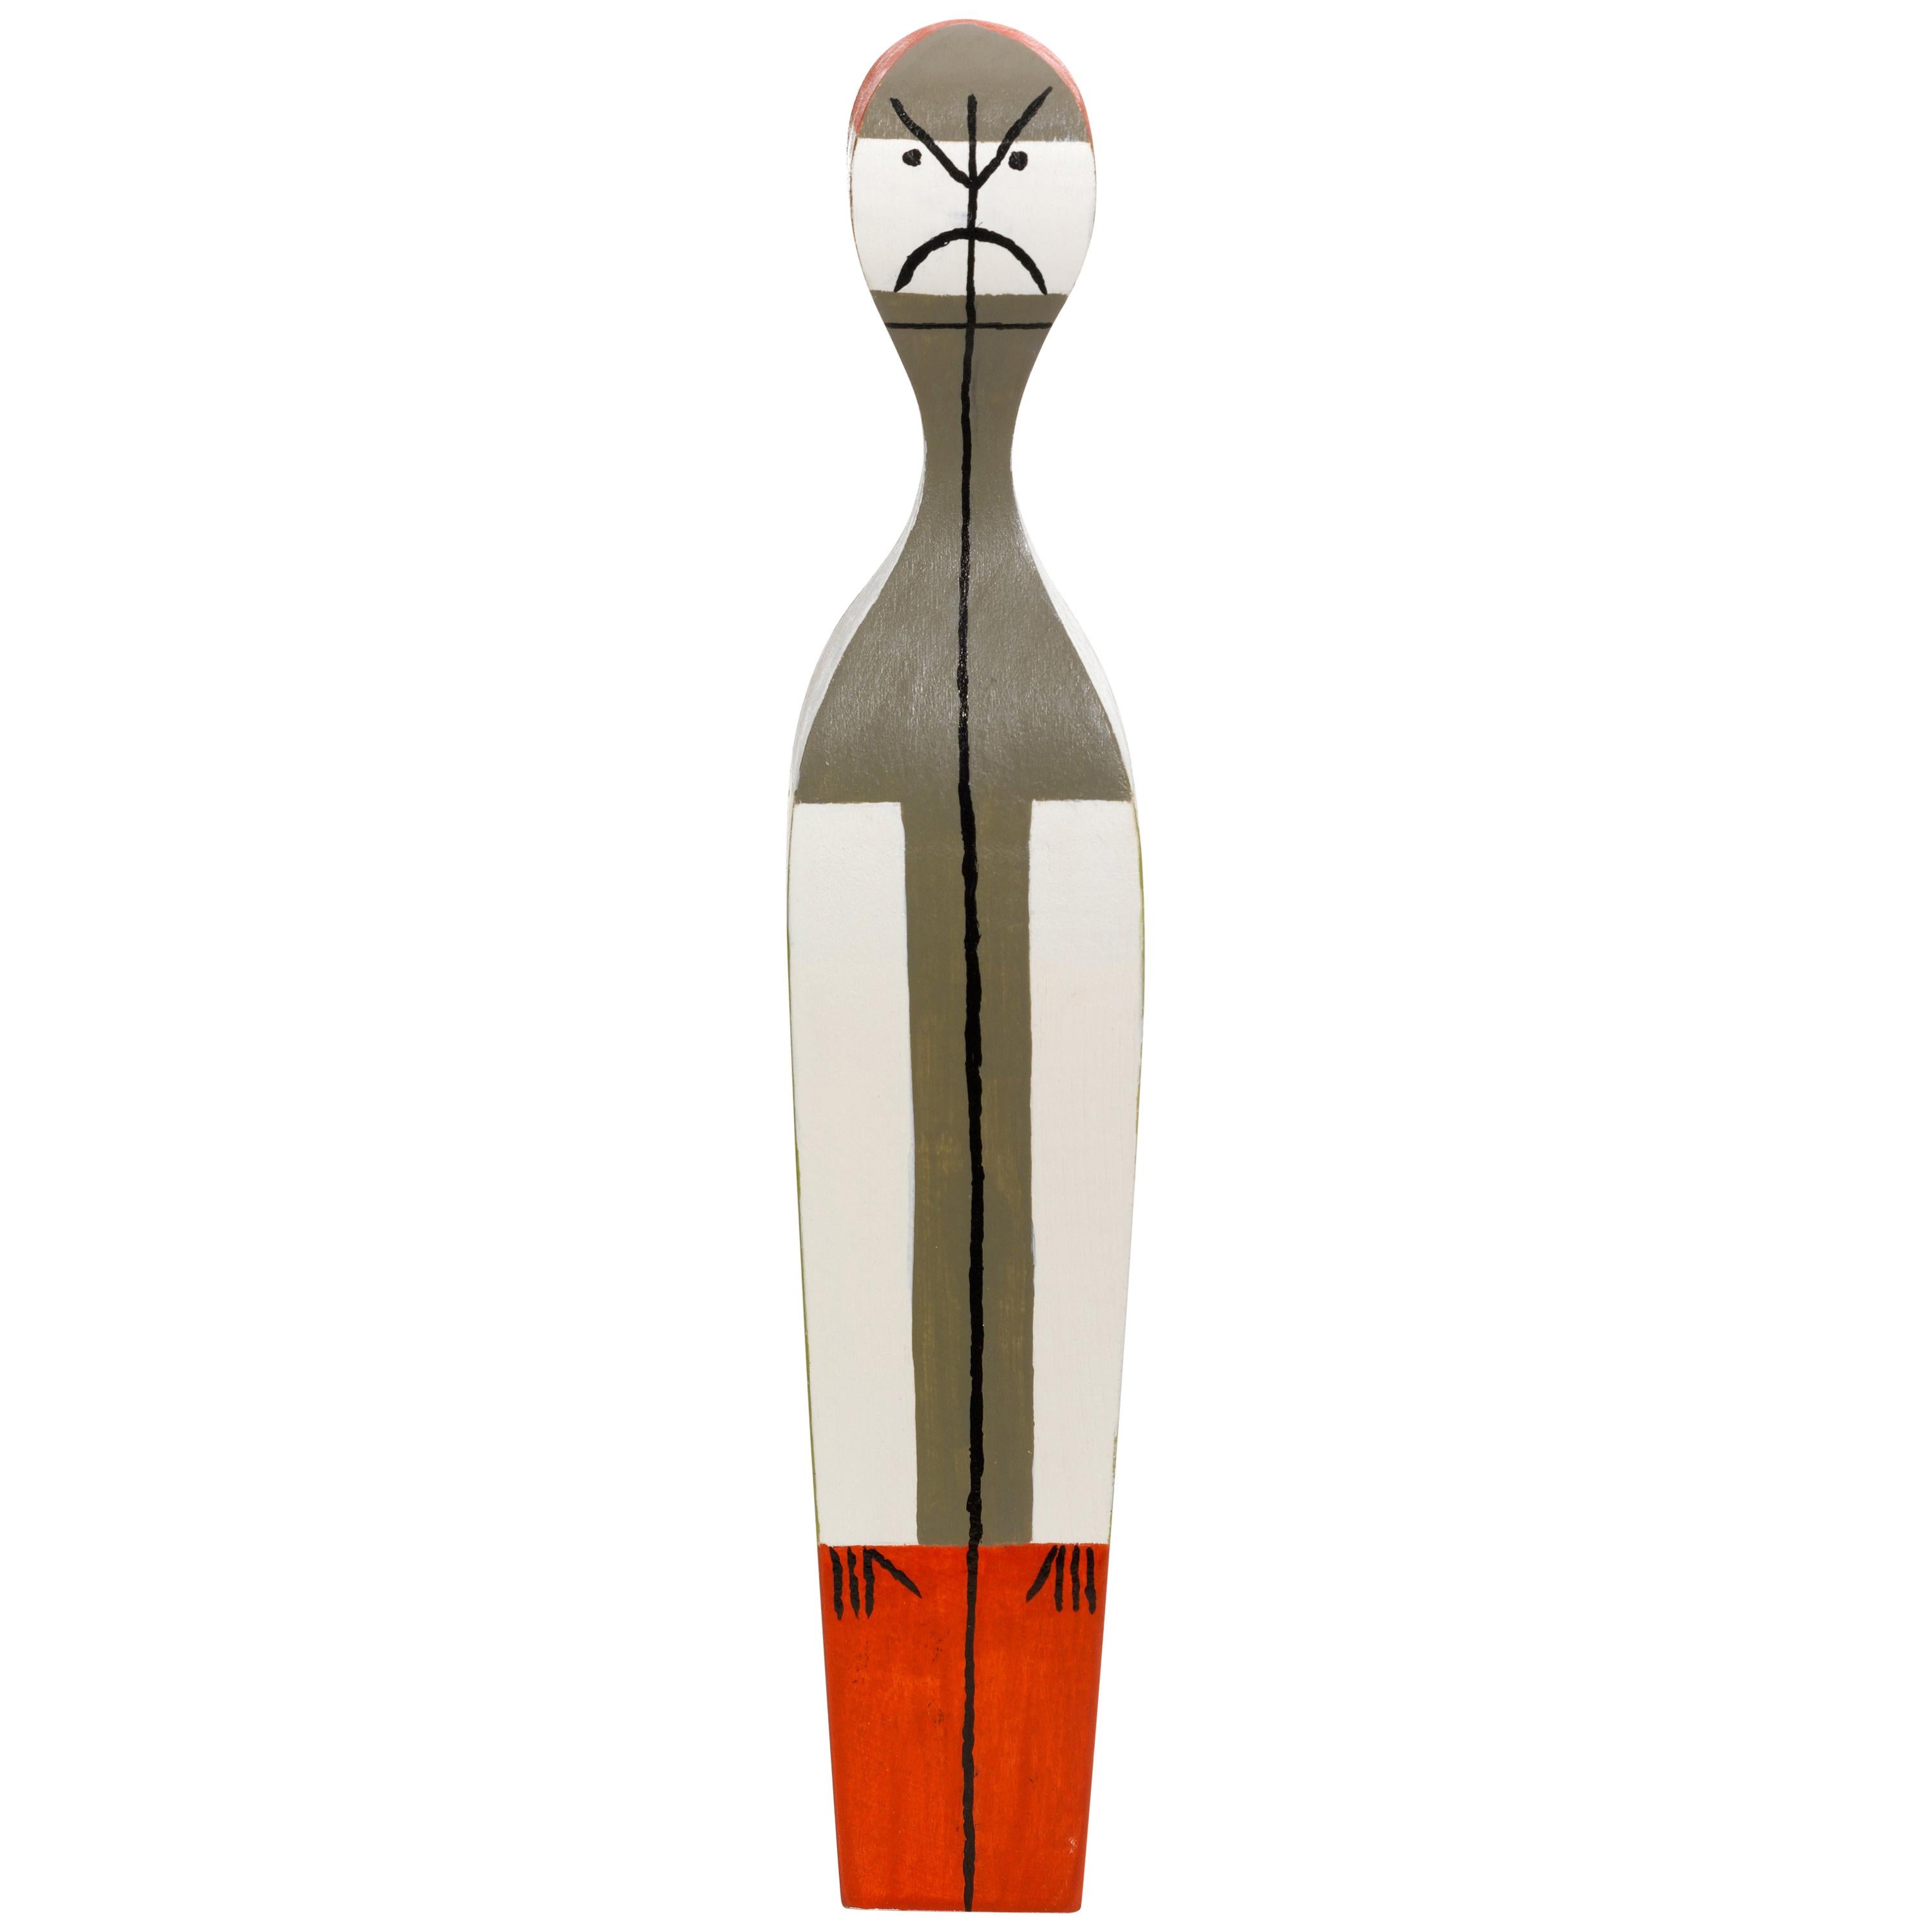 Vitra Wooden Doll No. 14 by Alexander Girard For Sale